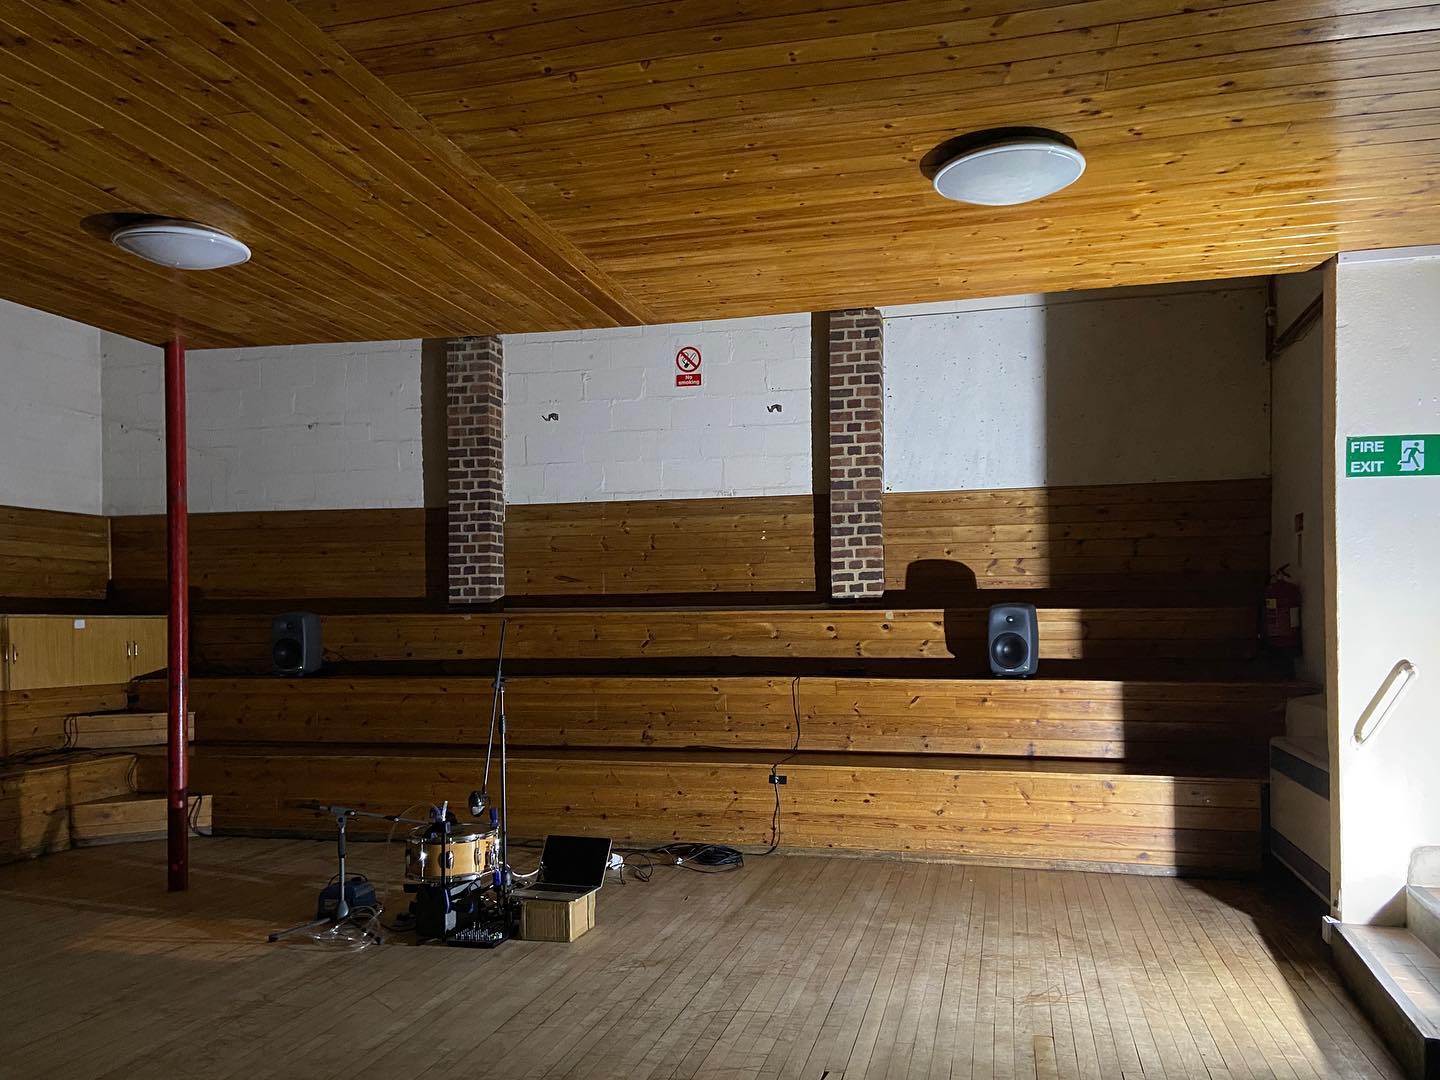 entirely wooden room set up for solo drum